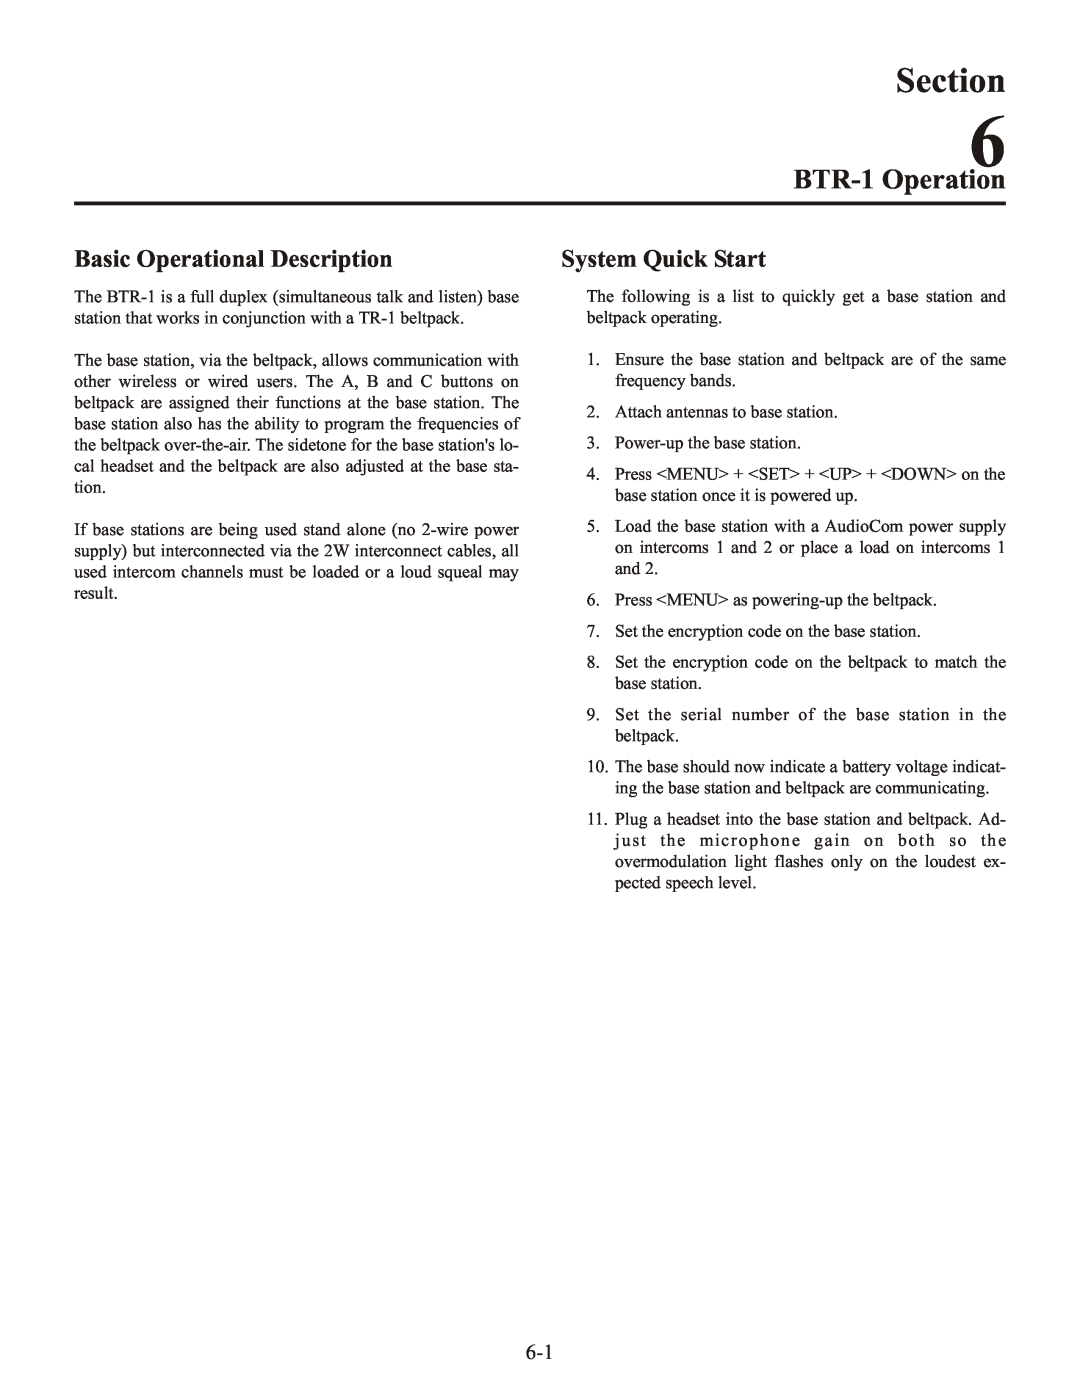 Telex operating instructions BTR-1 Operation, Basic Operational Description, Section, System Quick Start 